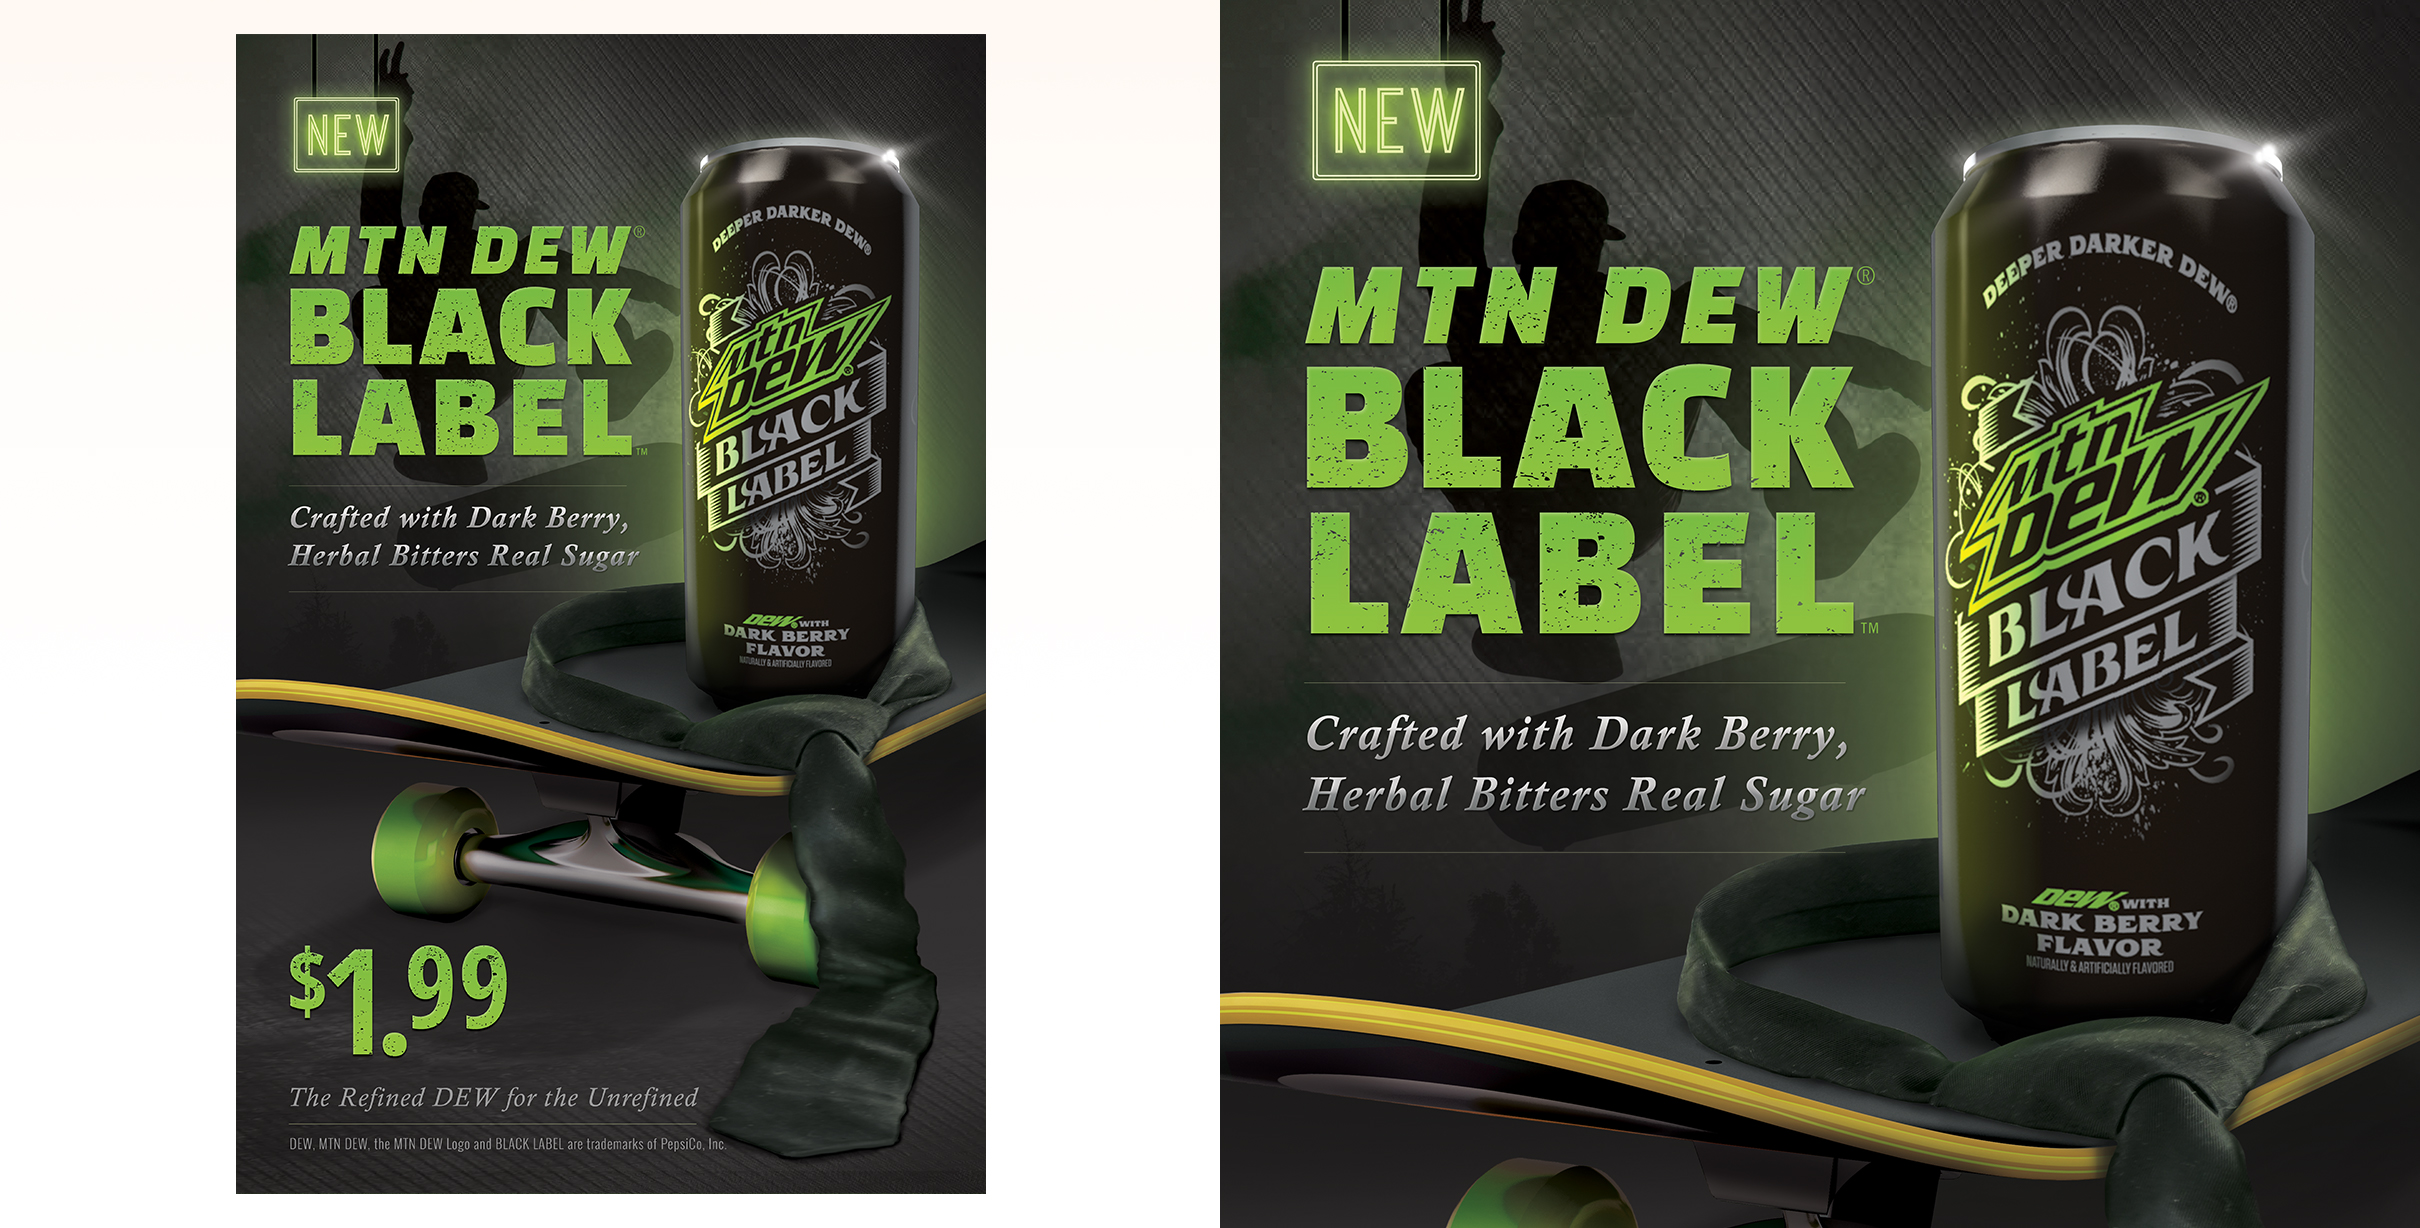 First concept for Mtn Dew Black Label